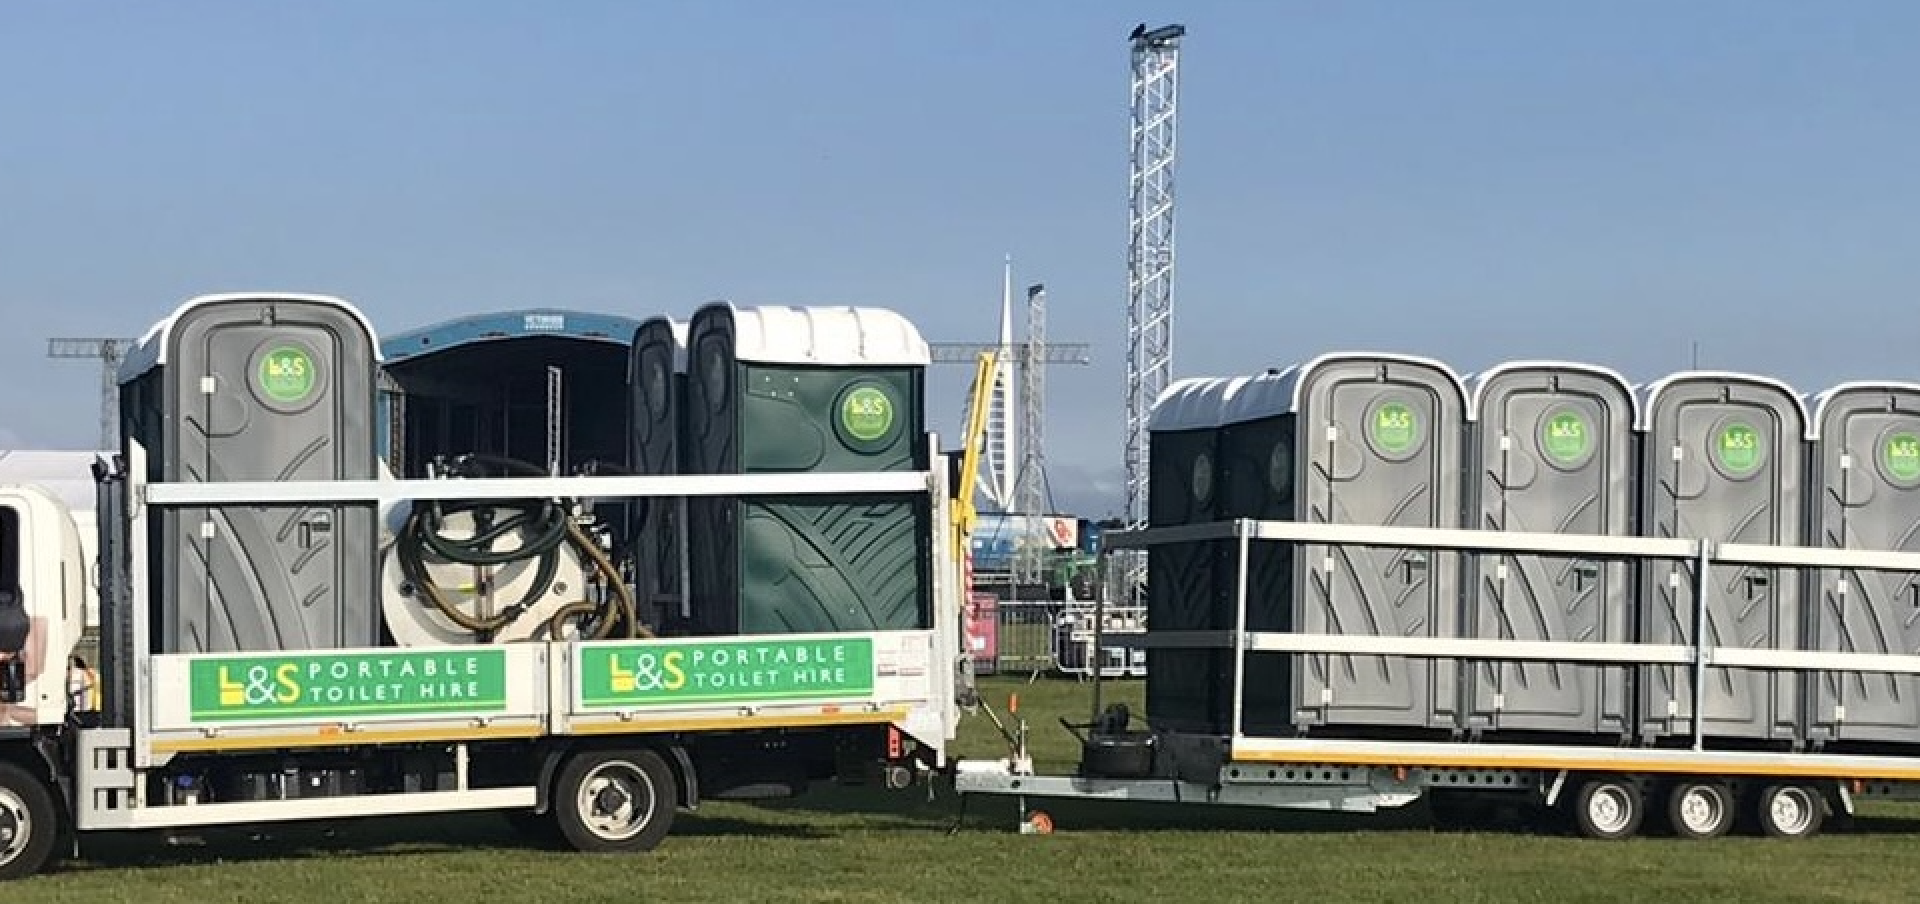 L&S Portable Toilets at Victorious